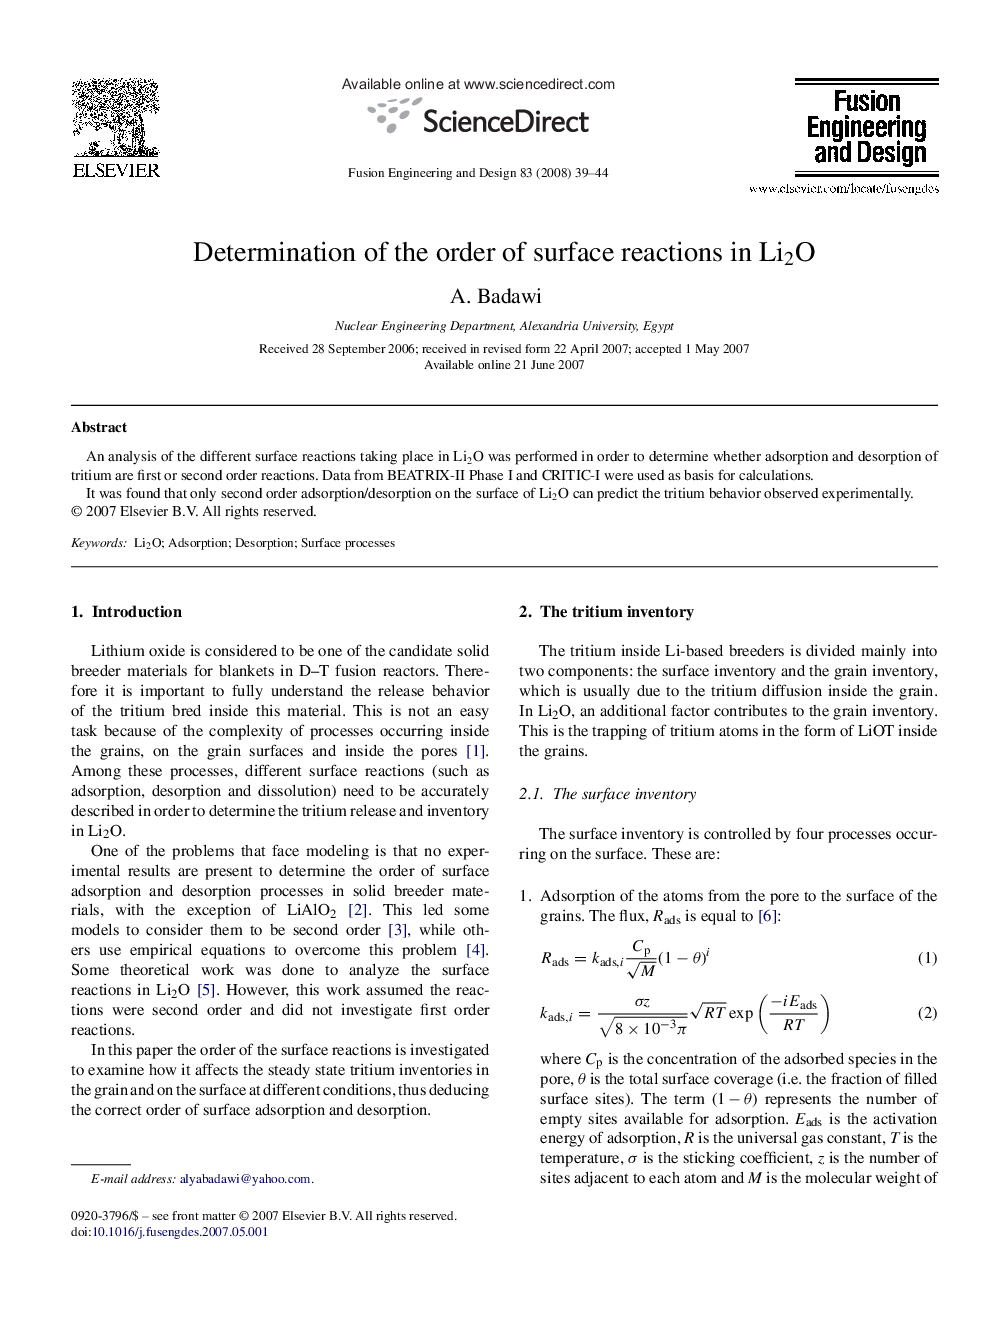 Determination of the order of surface reactions in Li2O